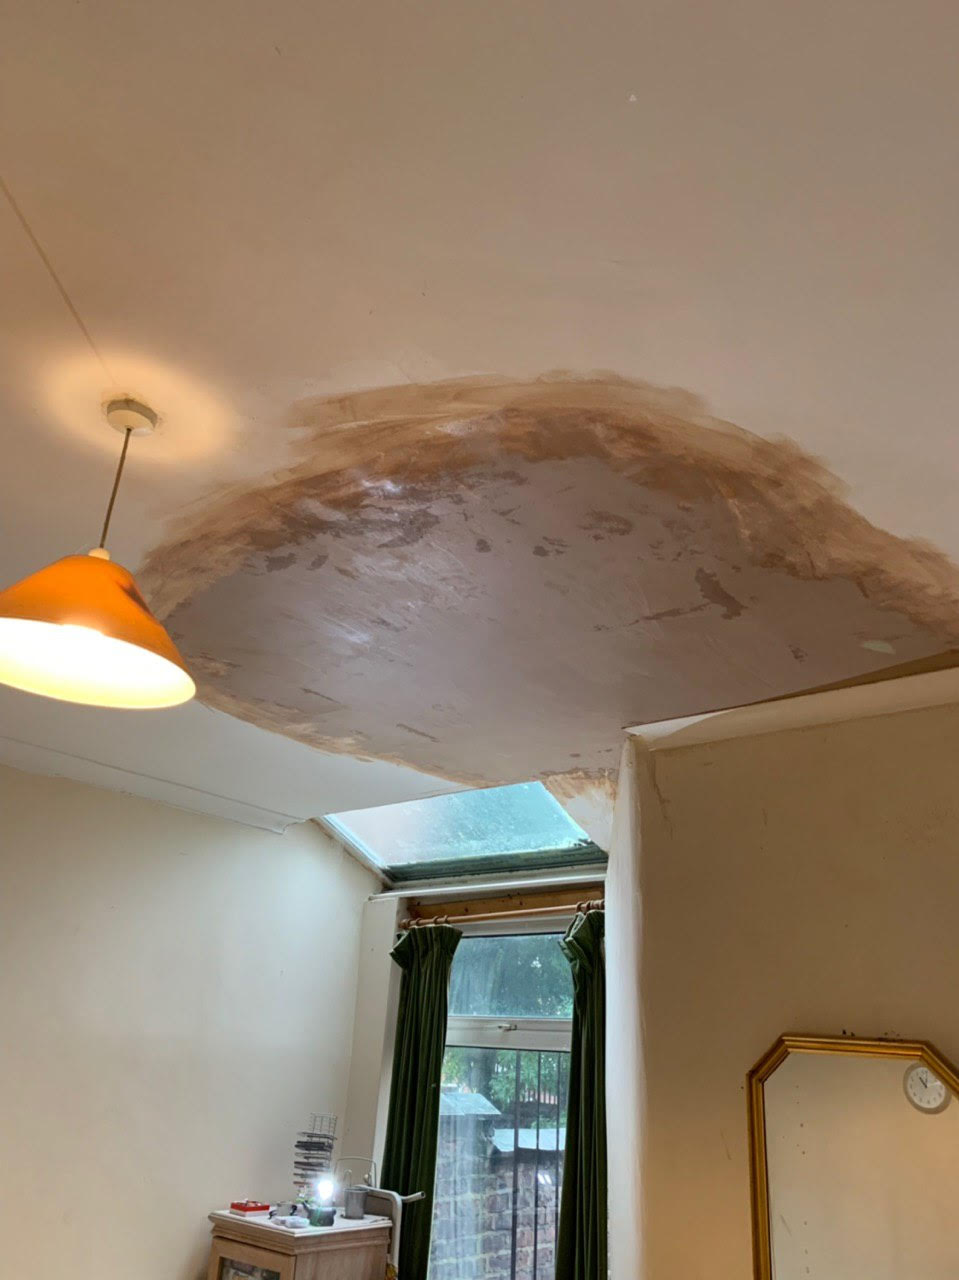 Water damaged ceiling due to a leak 2